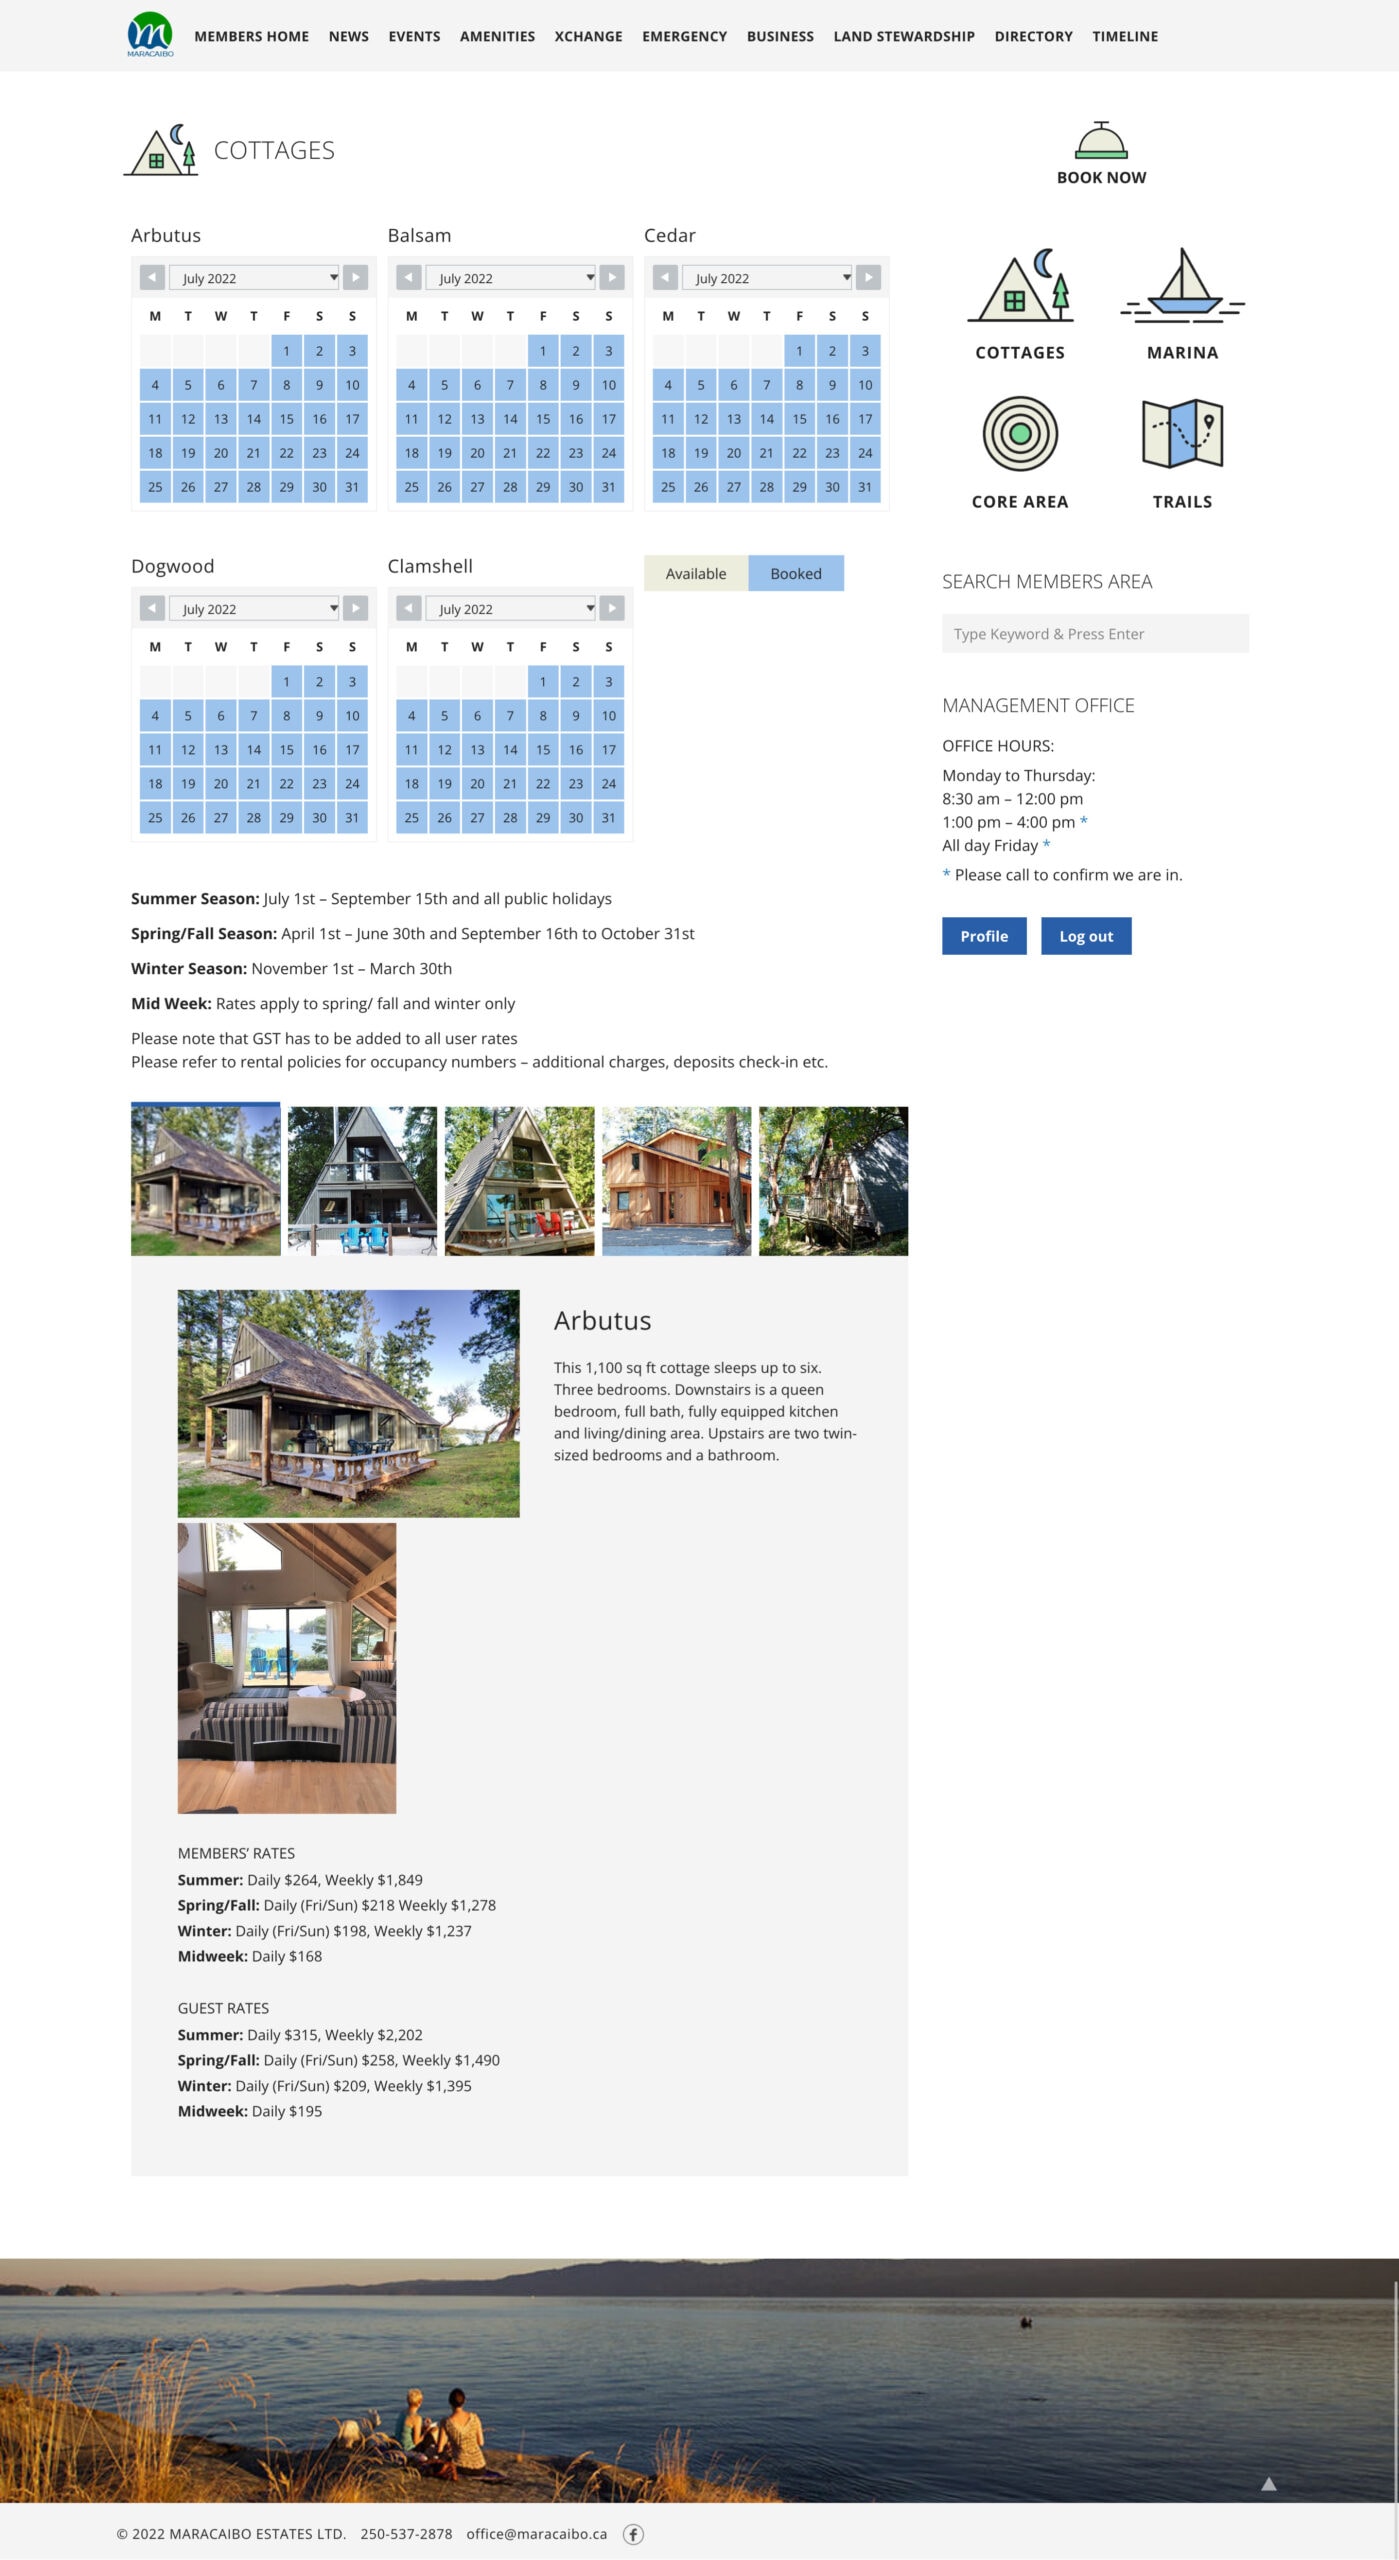 Maracaibo - members website - cottages